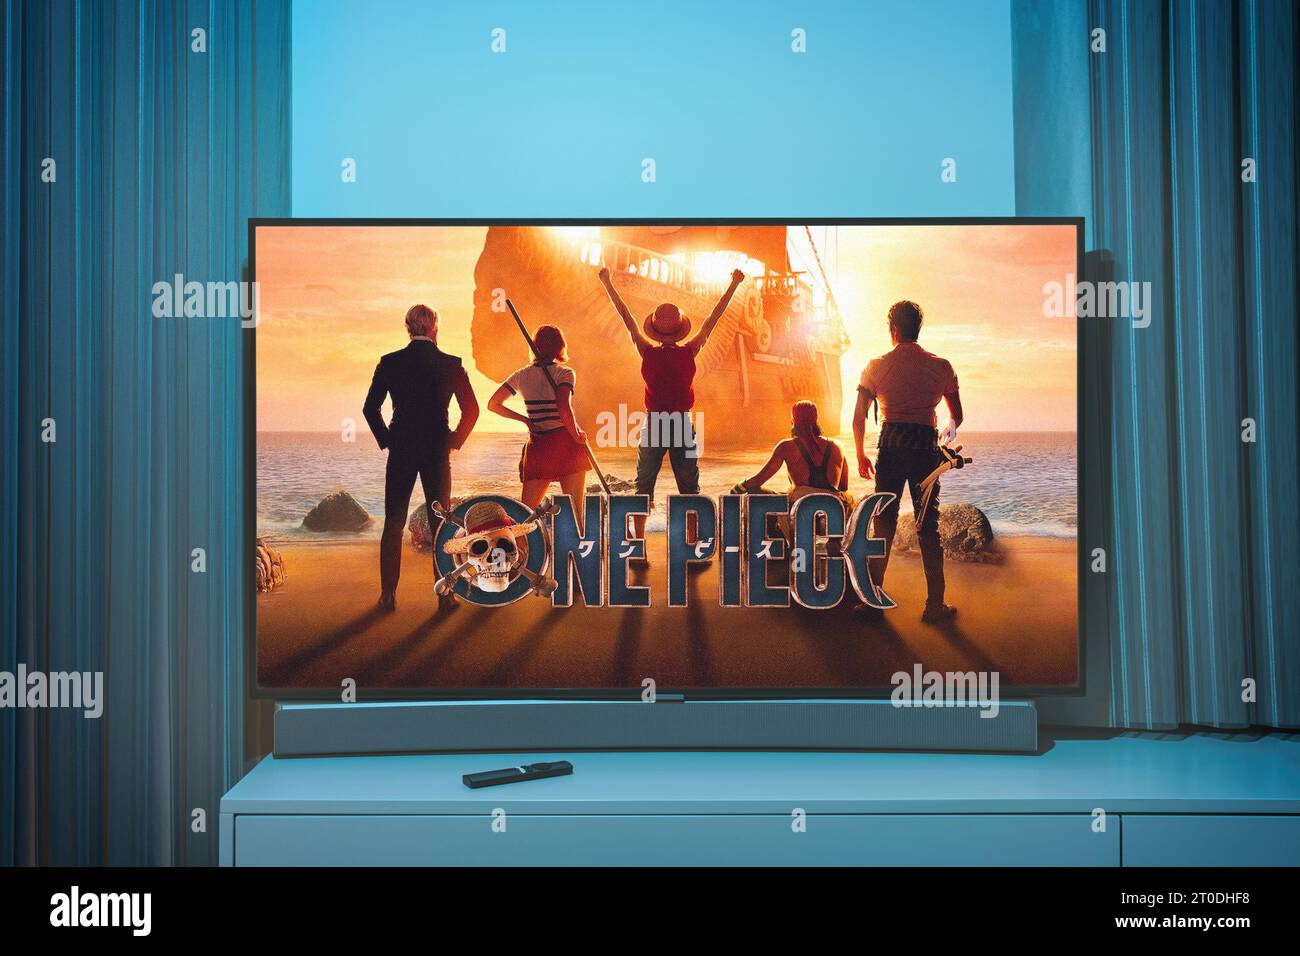 Popular Netflix TV Series One Piece on Television screen. TV show Stock Photo